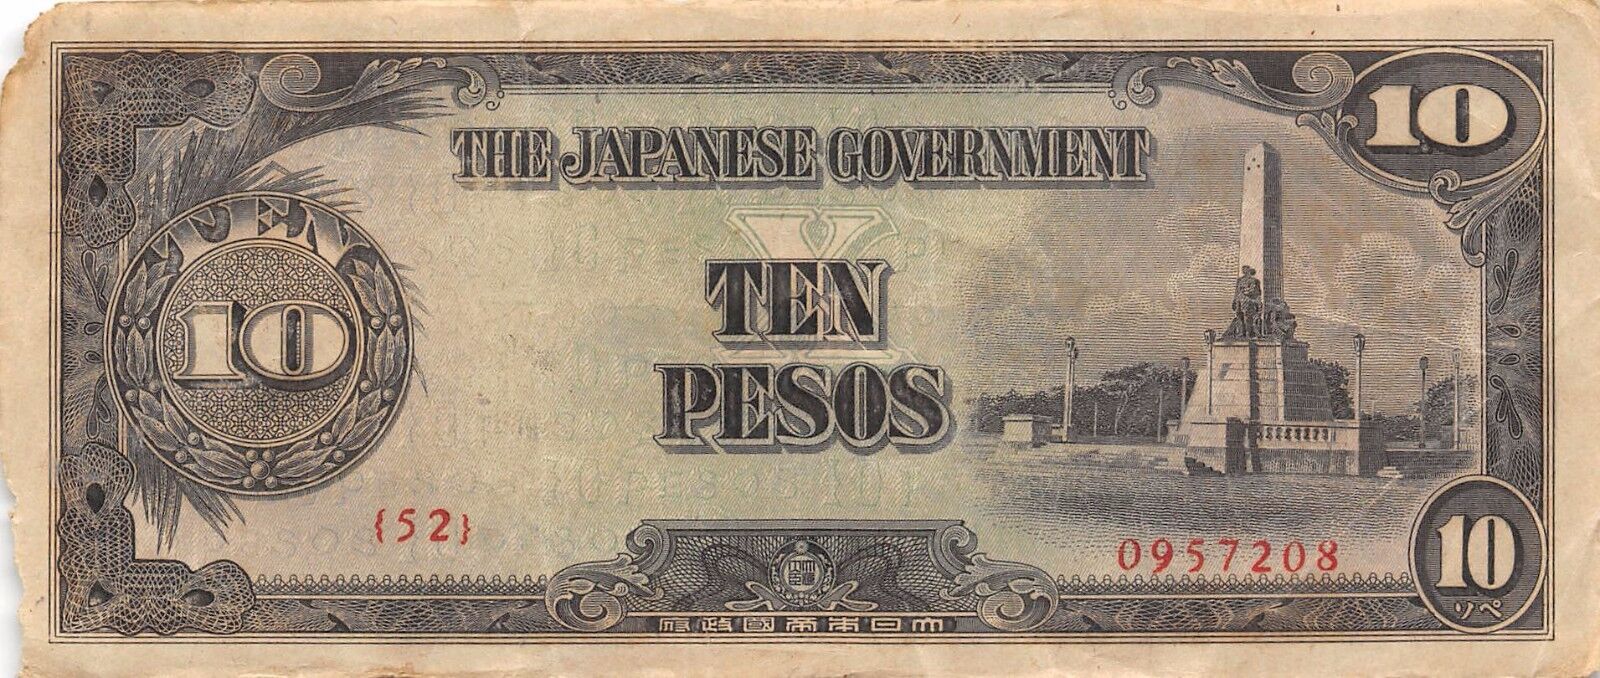 Philippines  10  Pesos ND. 1943  Block {52}  WWII Issue  Circulated Banknote